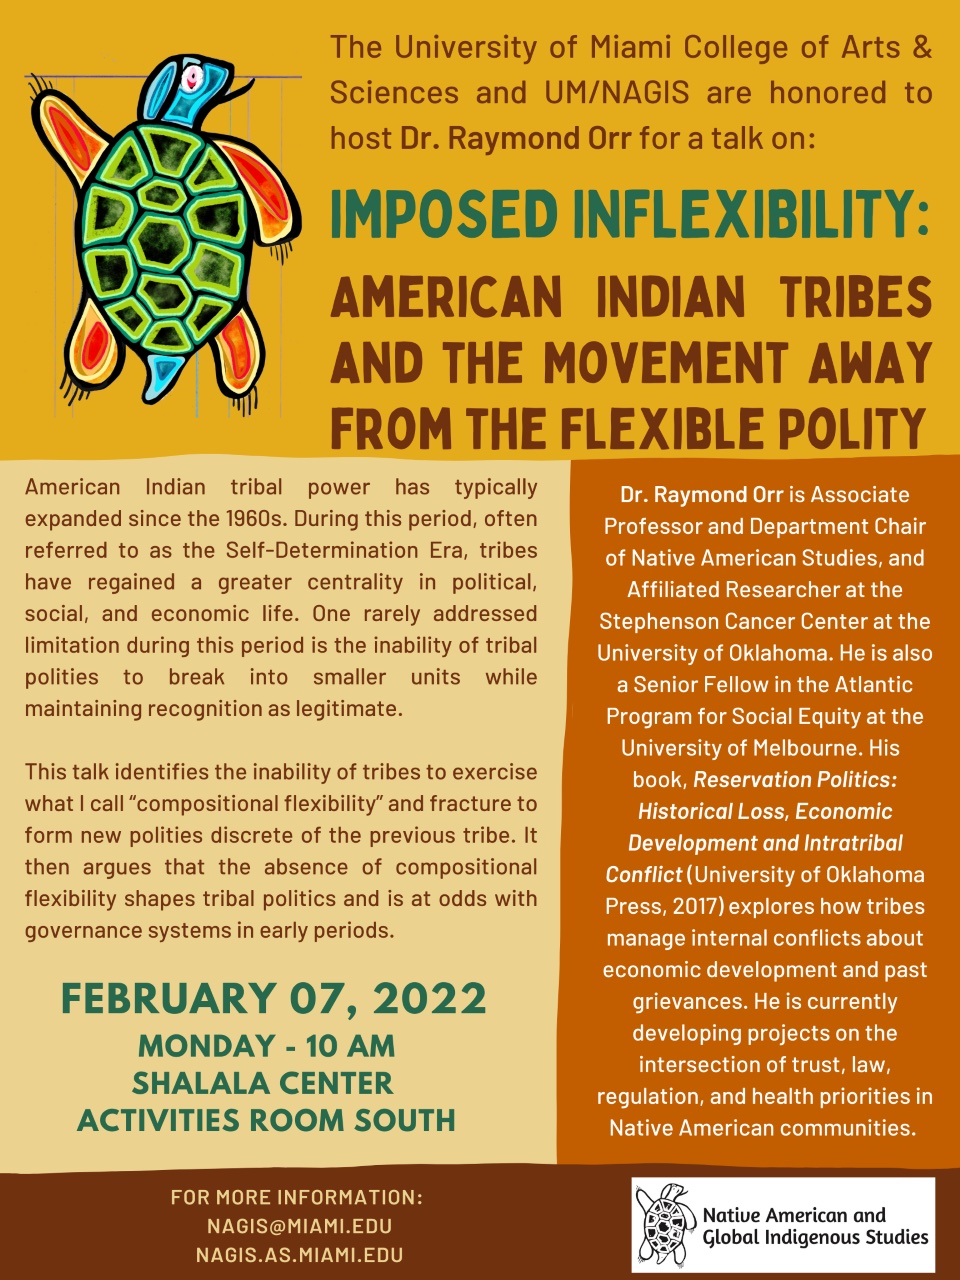 This is an image for an event flyer. The image contains text and graphic elements such as colored rectangles, and hand-drawn turtle. There is also an image of the guest speaker, Dr. Raymond Orr. This image contains details about the event on February 7, 2022.